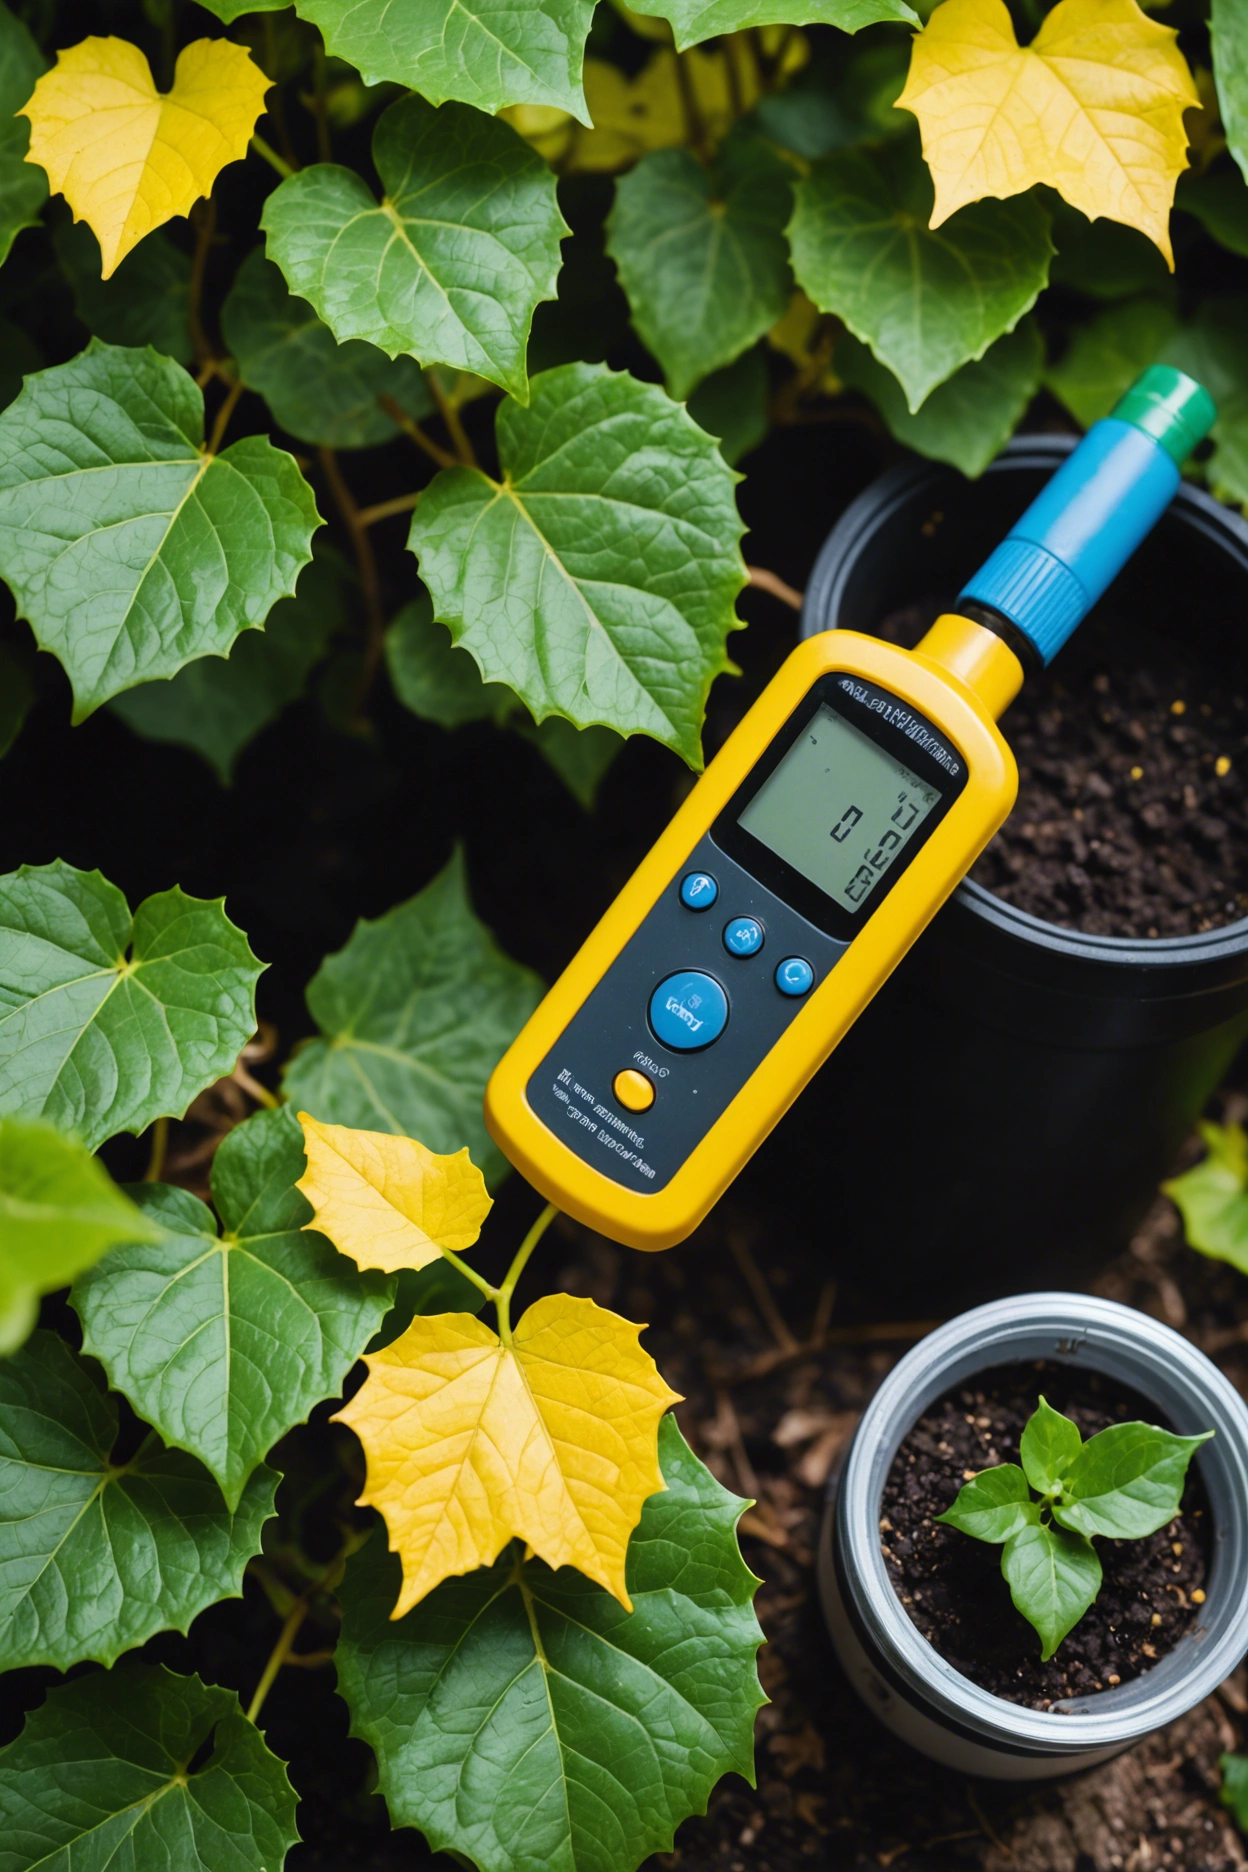 "Close-up of an ivy plant with yellowing leaves, surrounded by a moisture meter, pH testing kit, and ivy fertilizer."